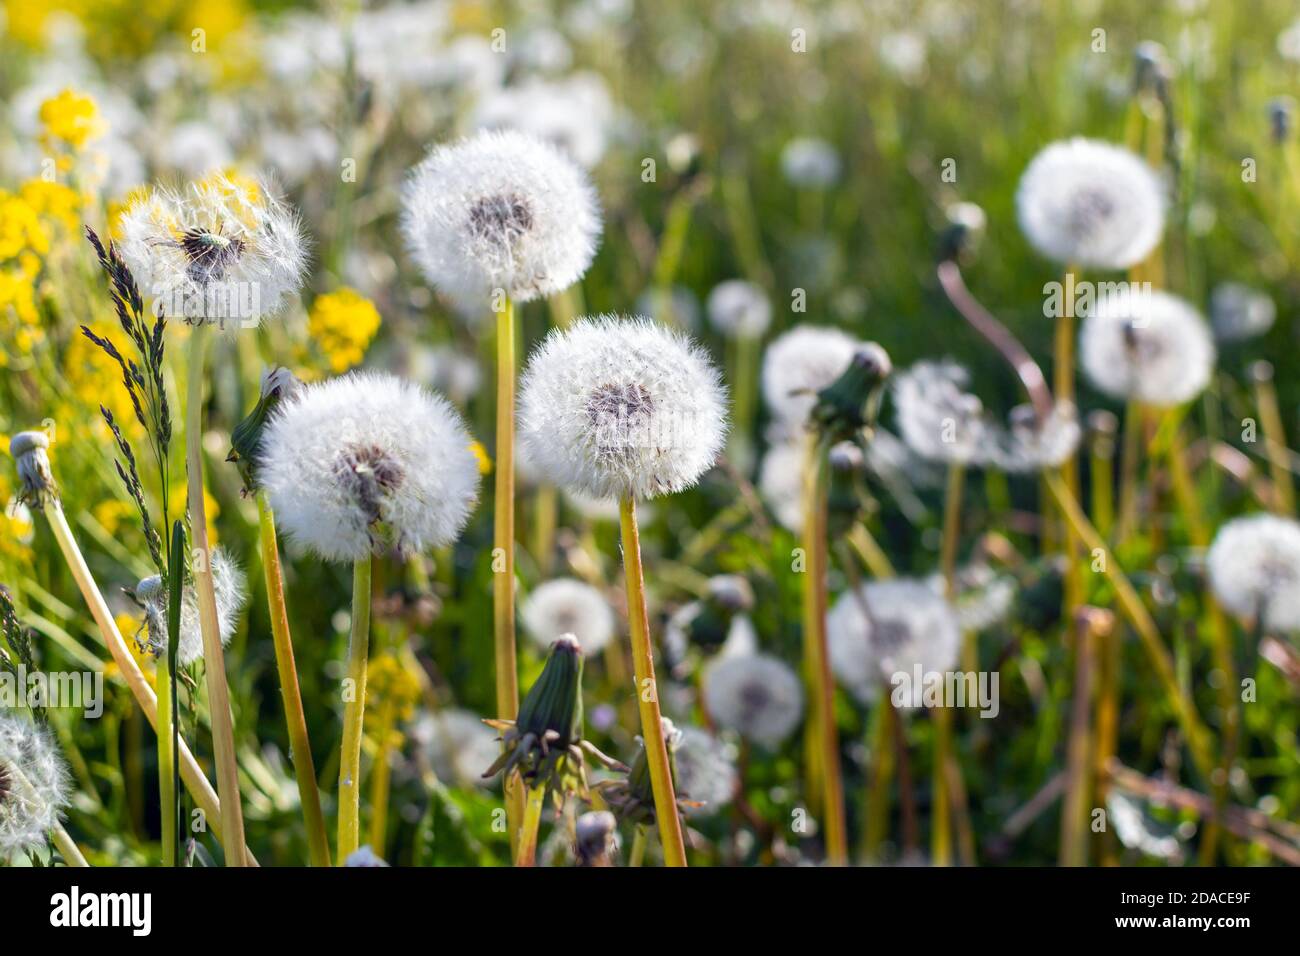 Seed heads of dandelion (Taraxacum) flower growing in a meadow at sunny spring day Stock Photo